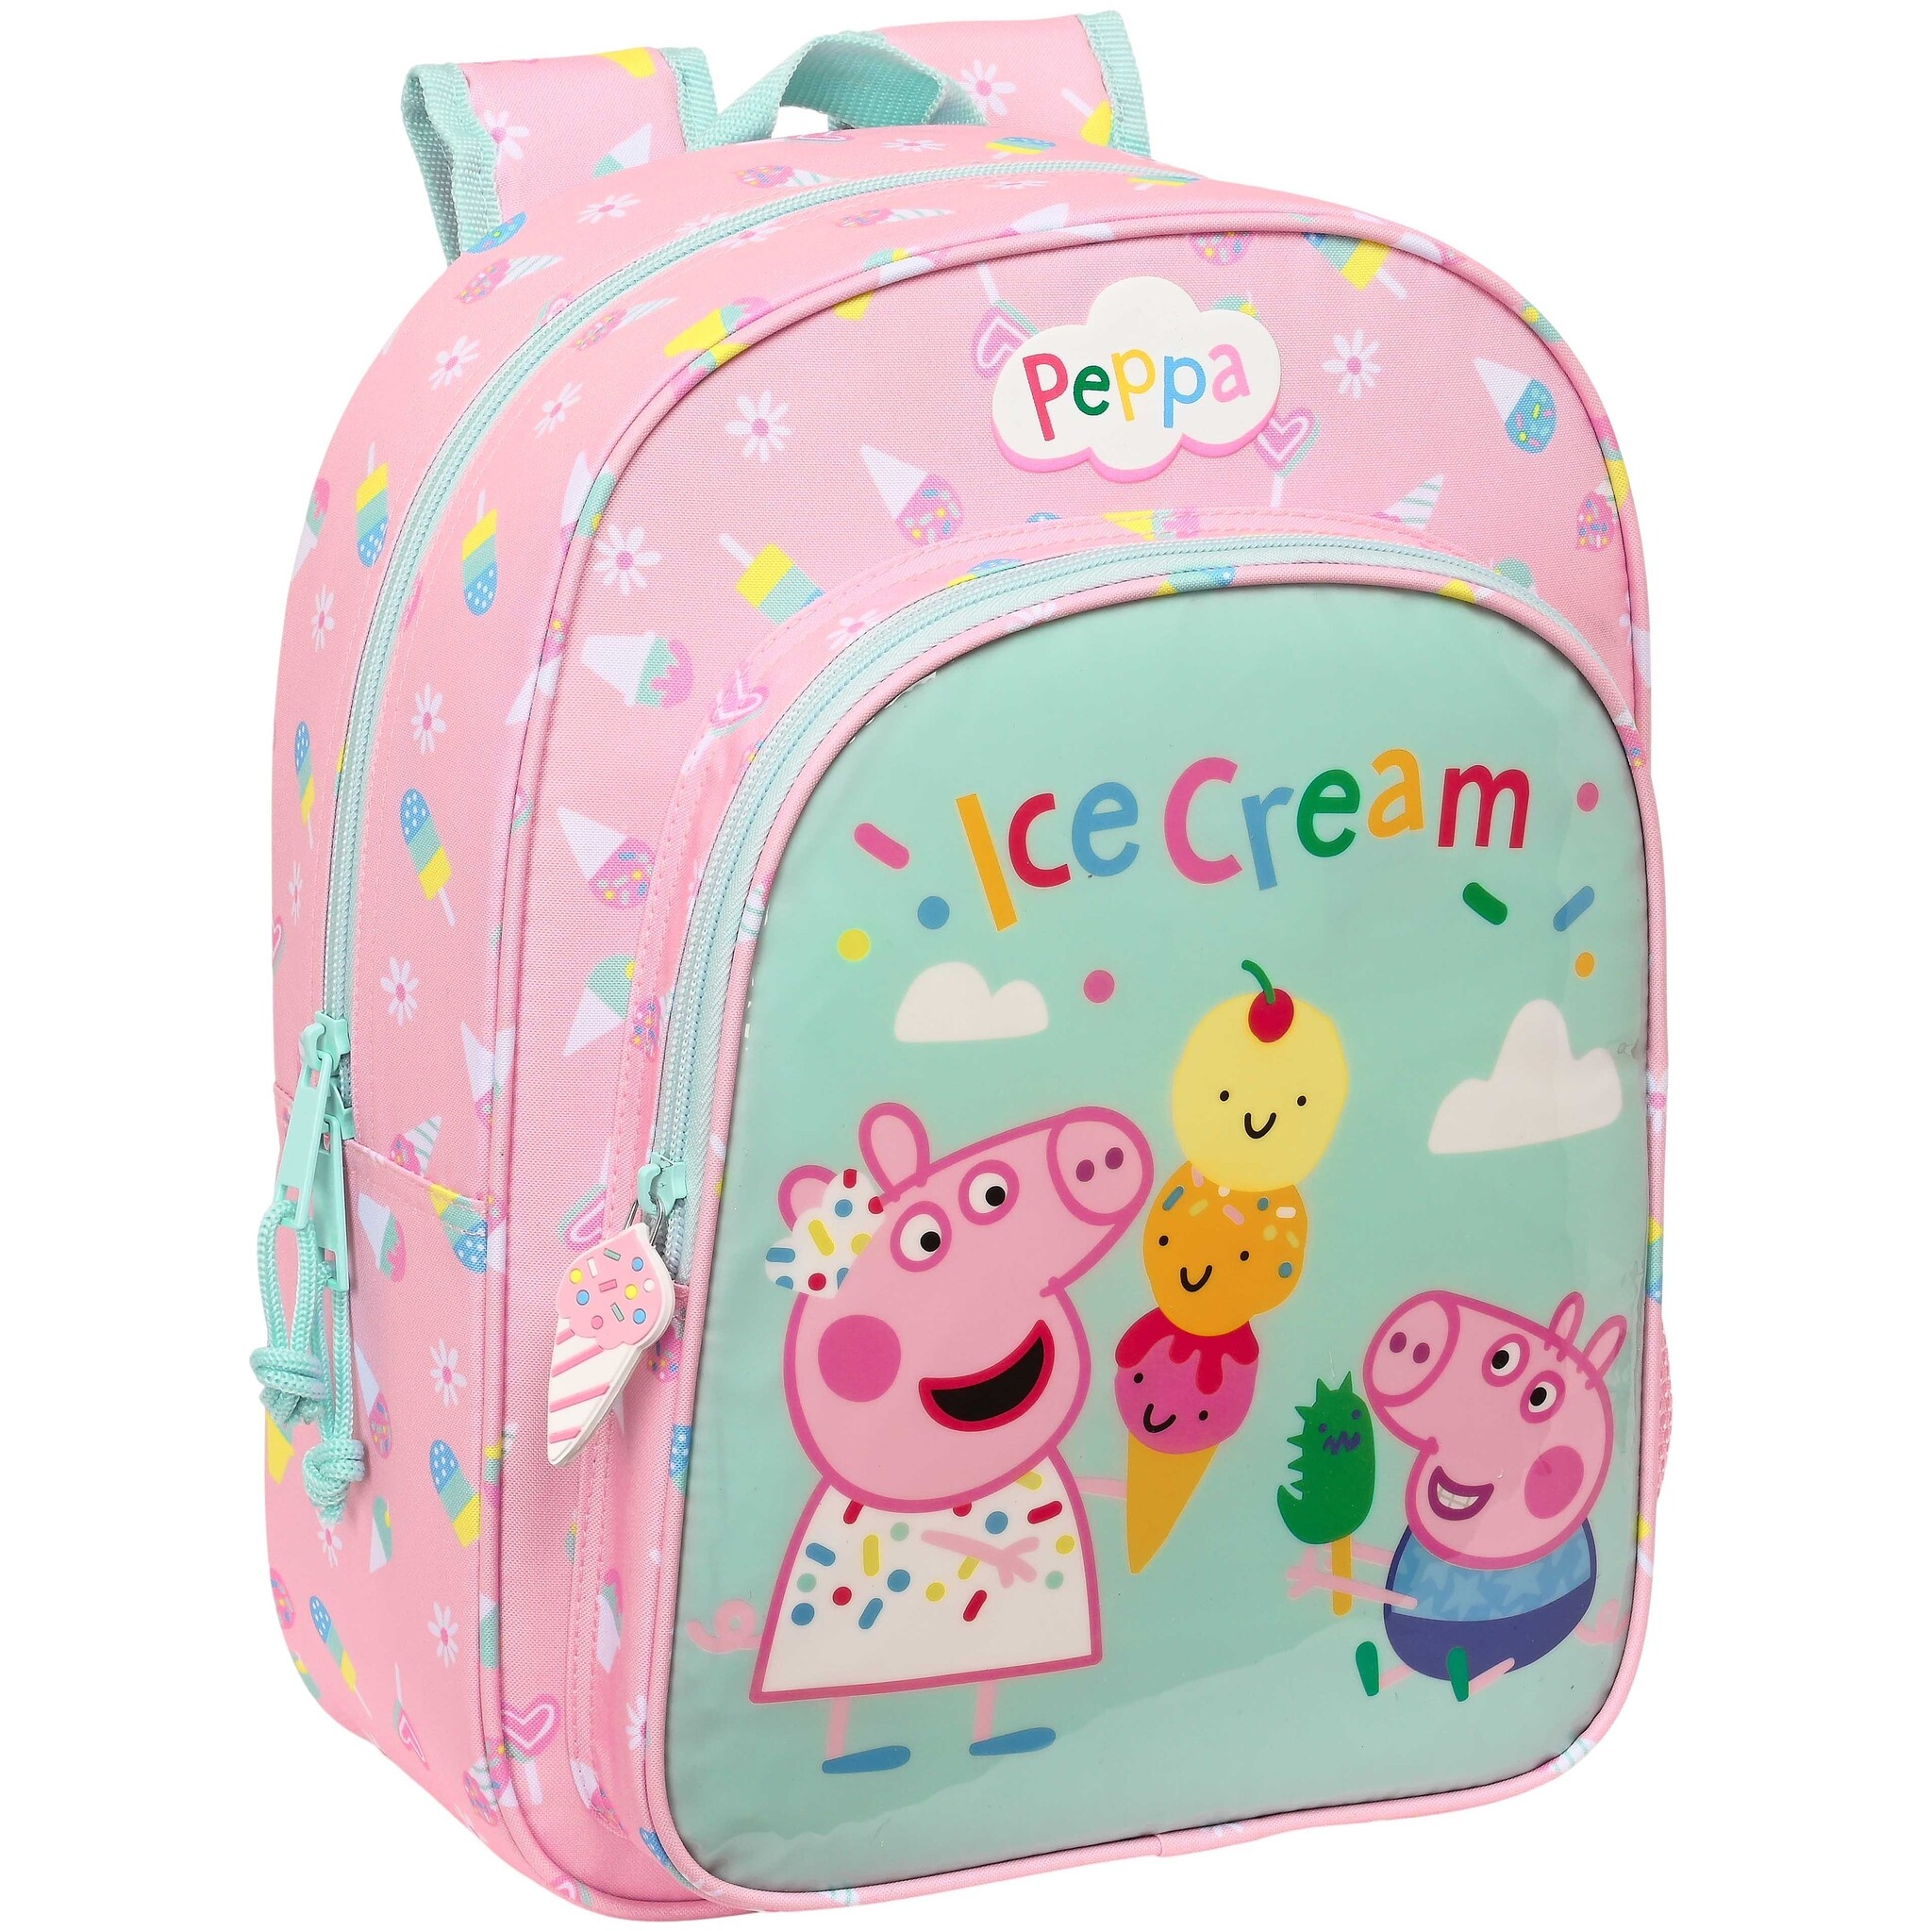 Peppa Pig Backpack, Ice Cream - 34 x 26 x 11 cm - Polyester